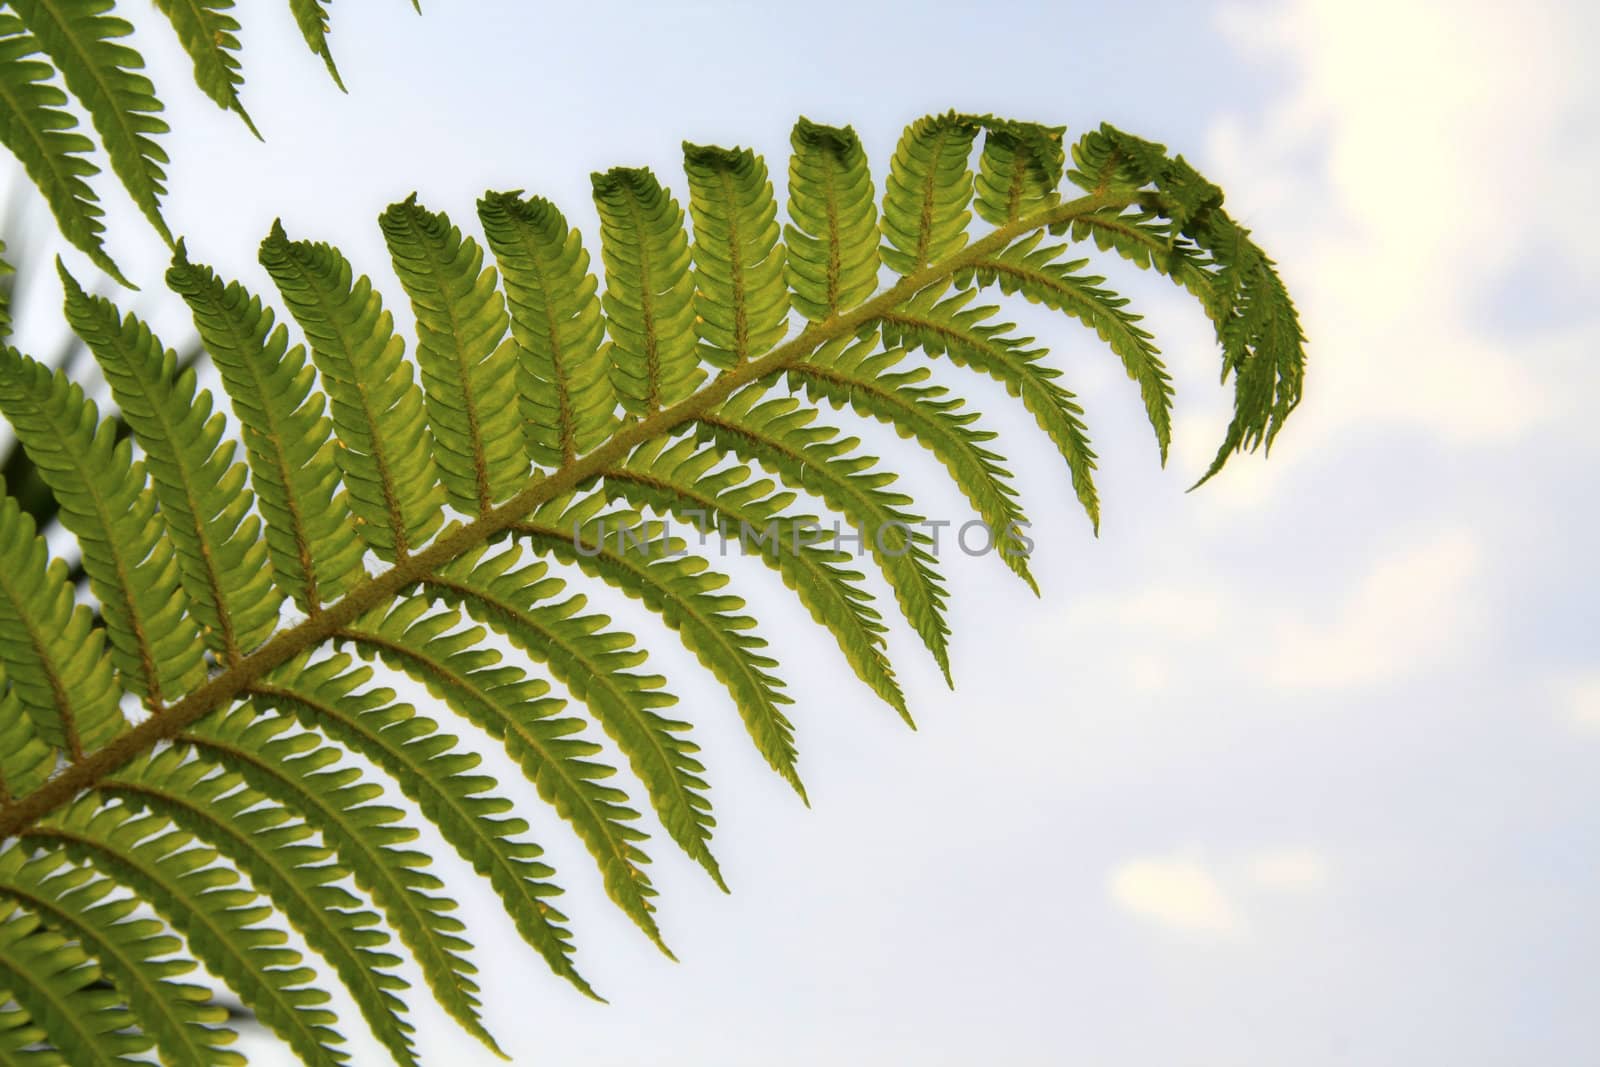 Tree fern against the sky by ChrisAlleaume